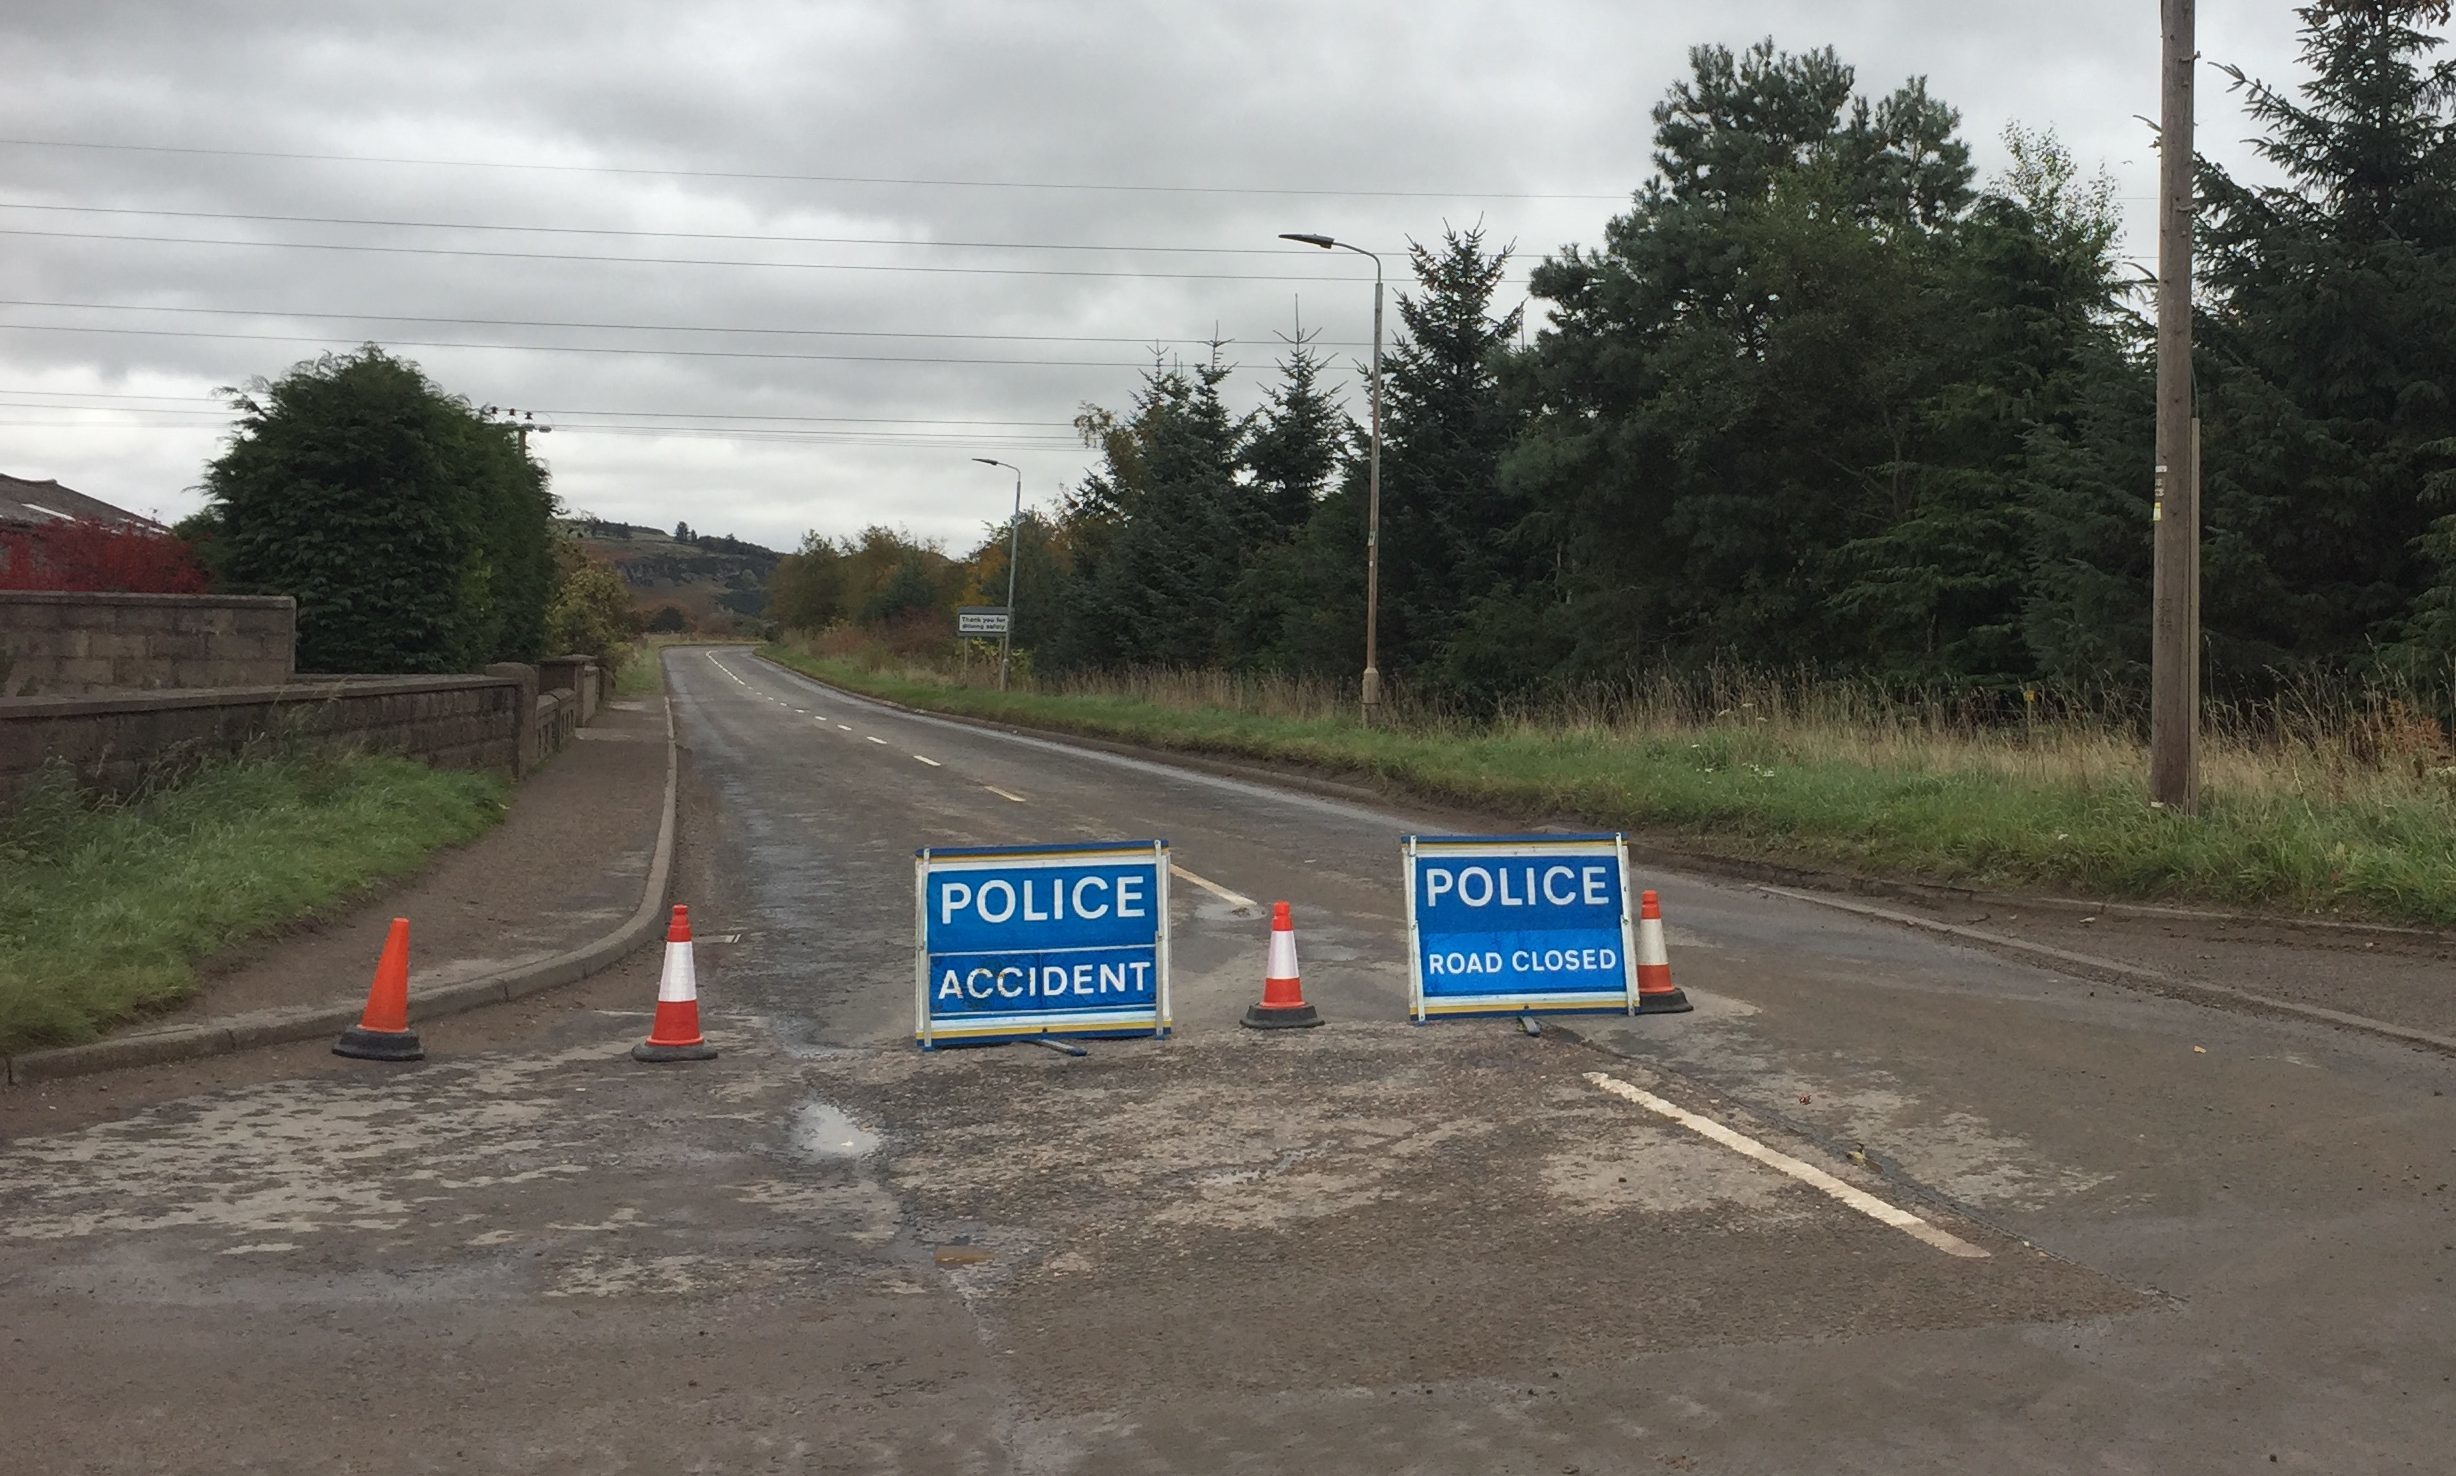 Police closed the road near Forfar following the serious crash.